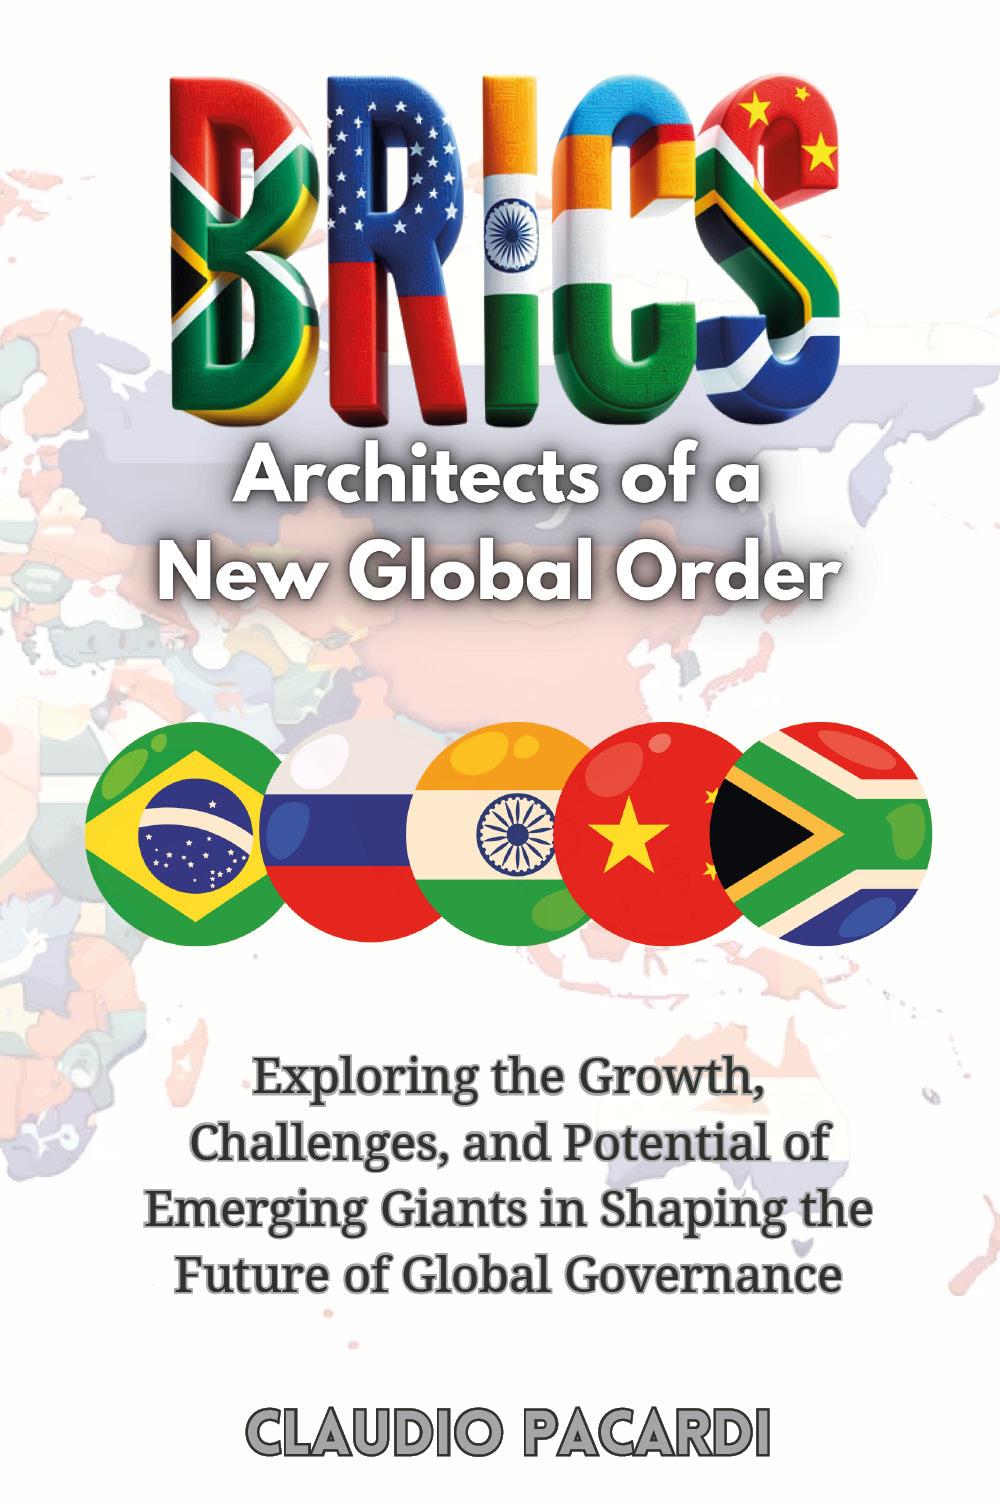 BRICS: Architects of a New Global Order